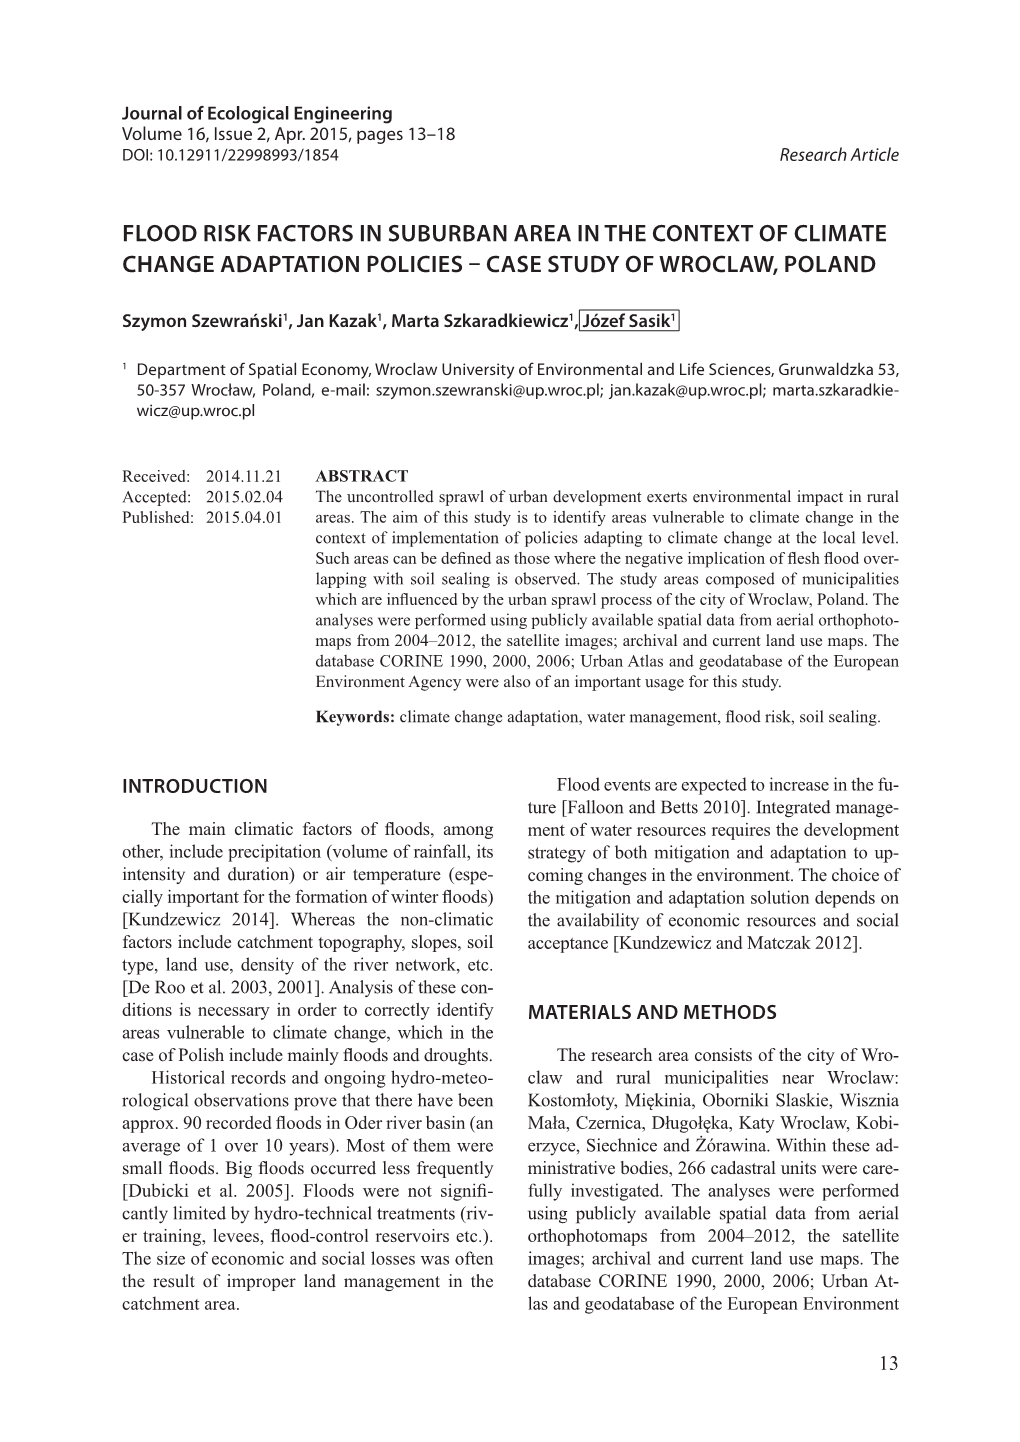 Flood Risk Factors in Suburban Area in the Context of Climate Change Adaptation Policies – Case Study of Wroclaw, Poland